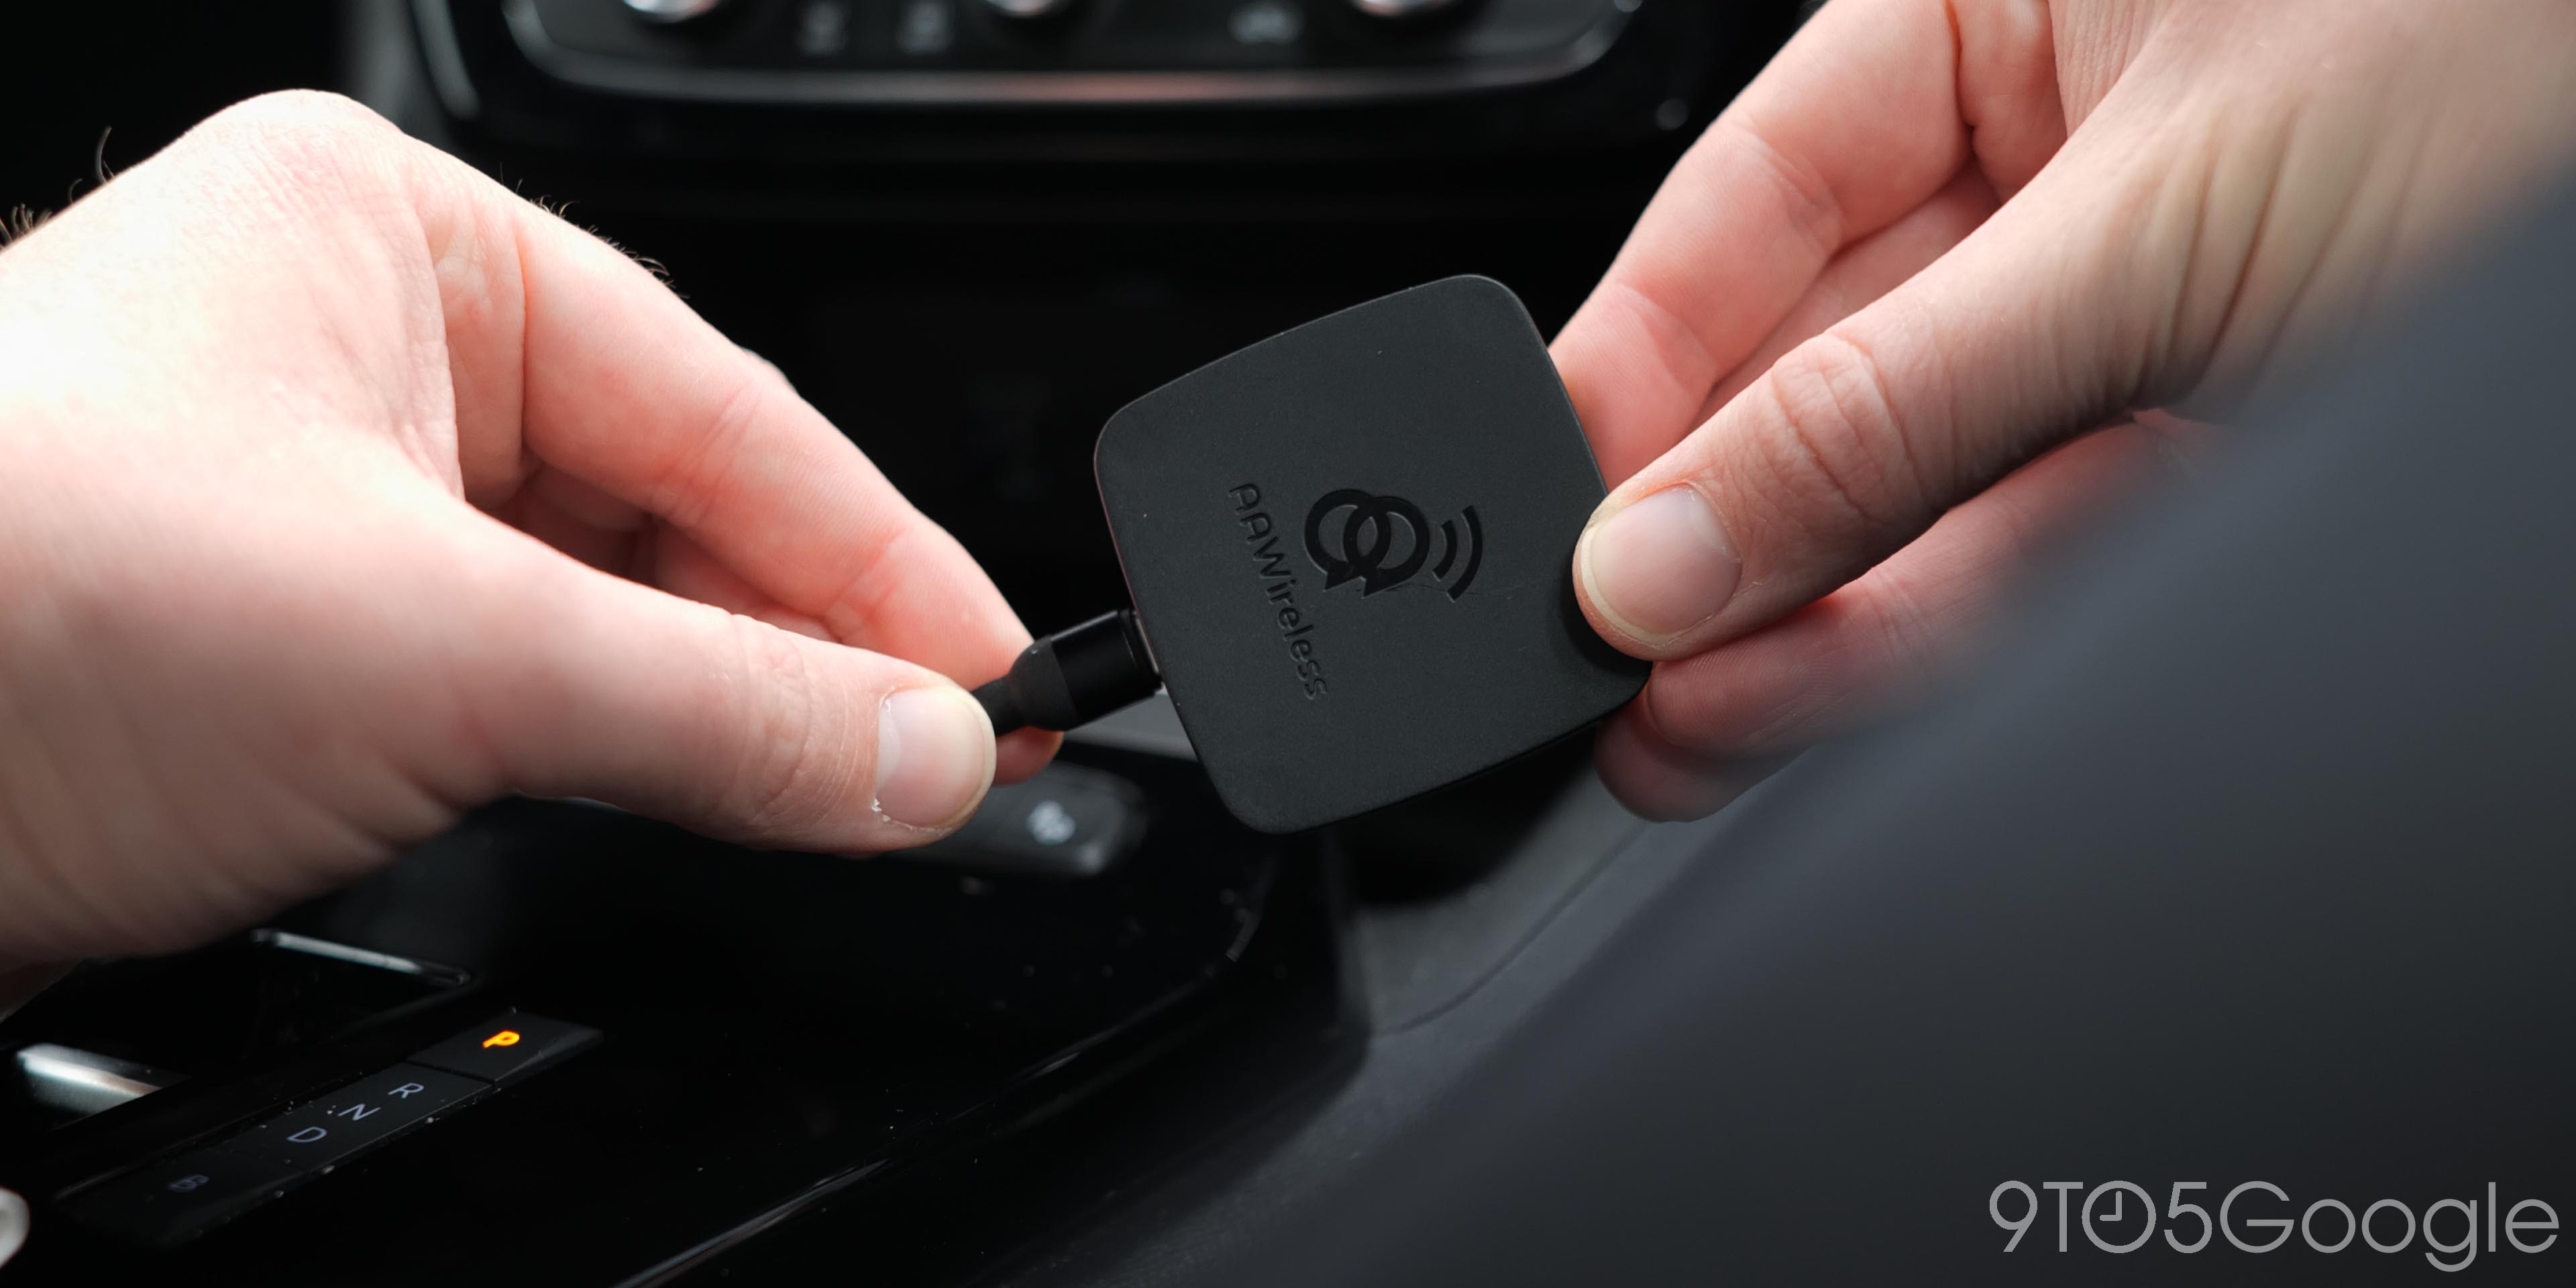 Review: AAWireless gives you wireless Android Auto in your car 